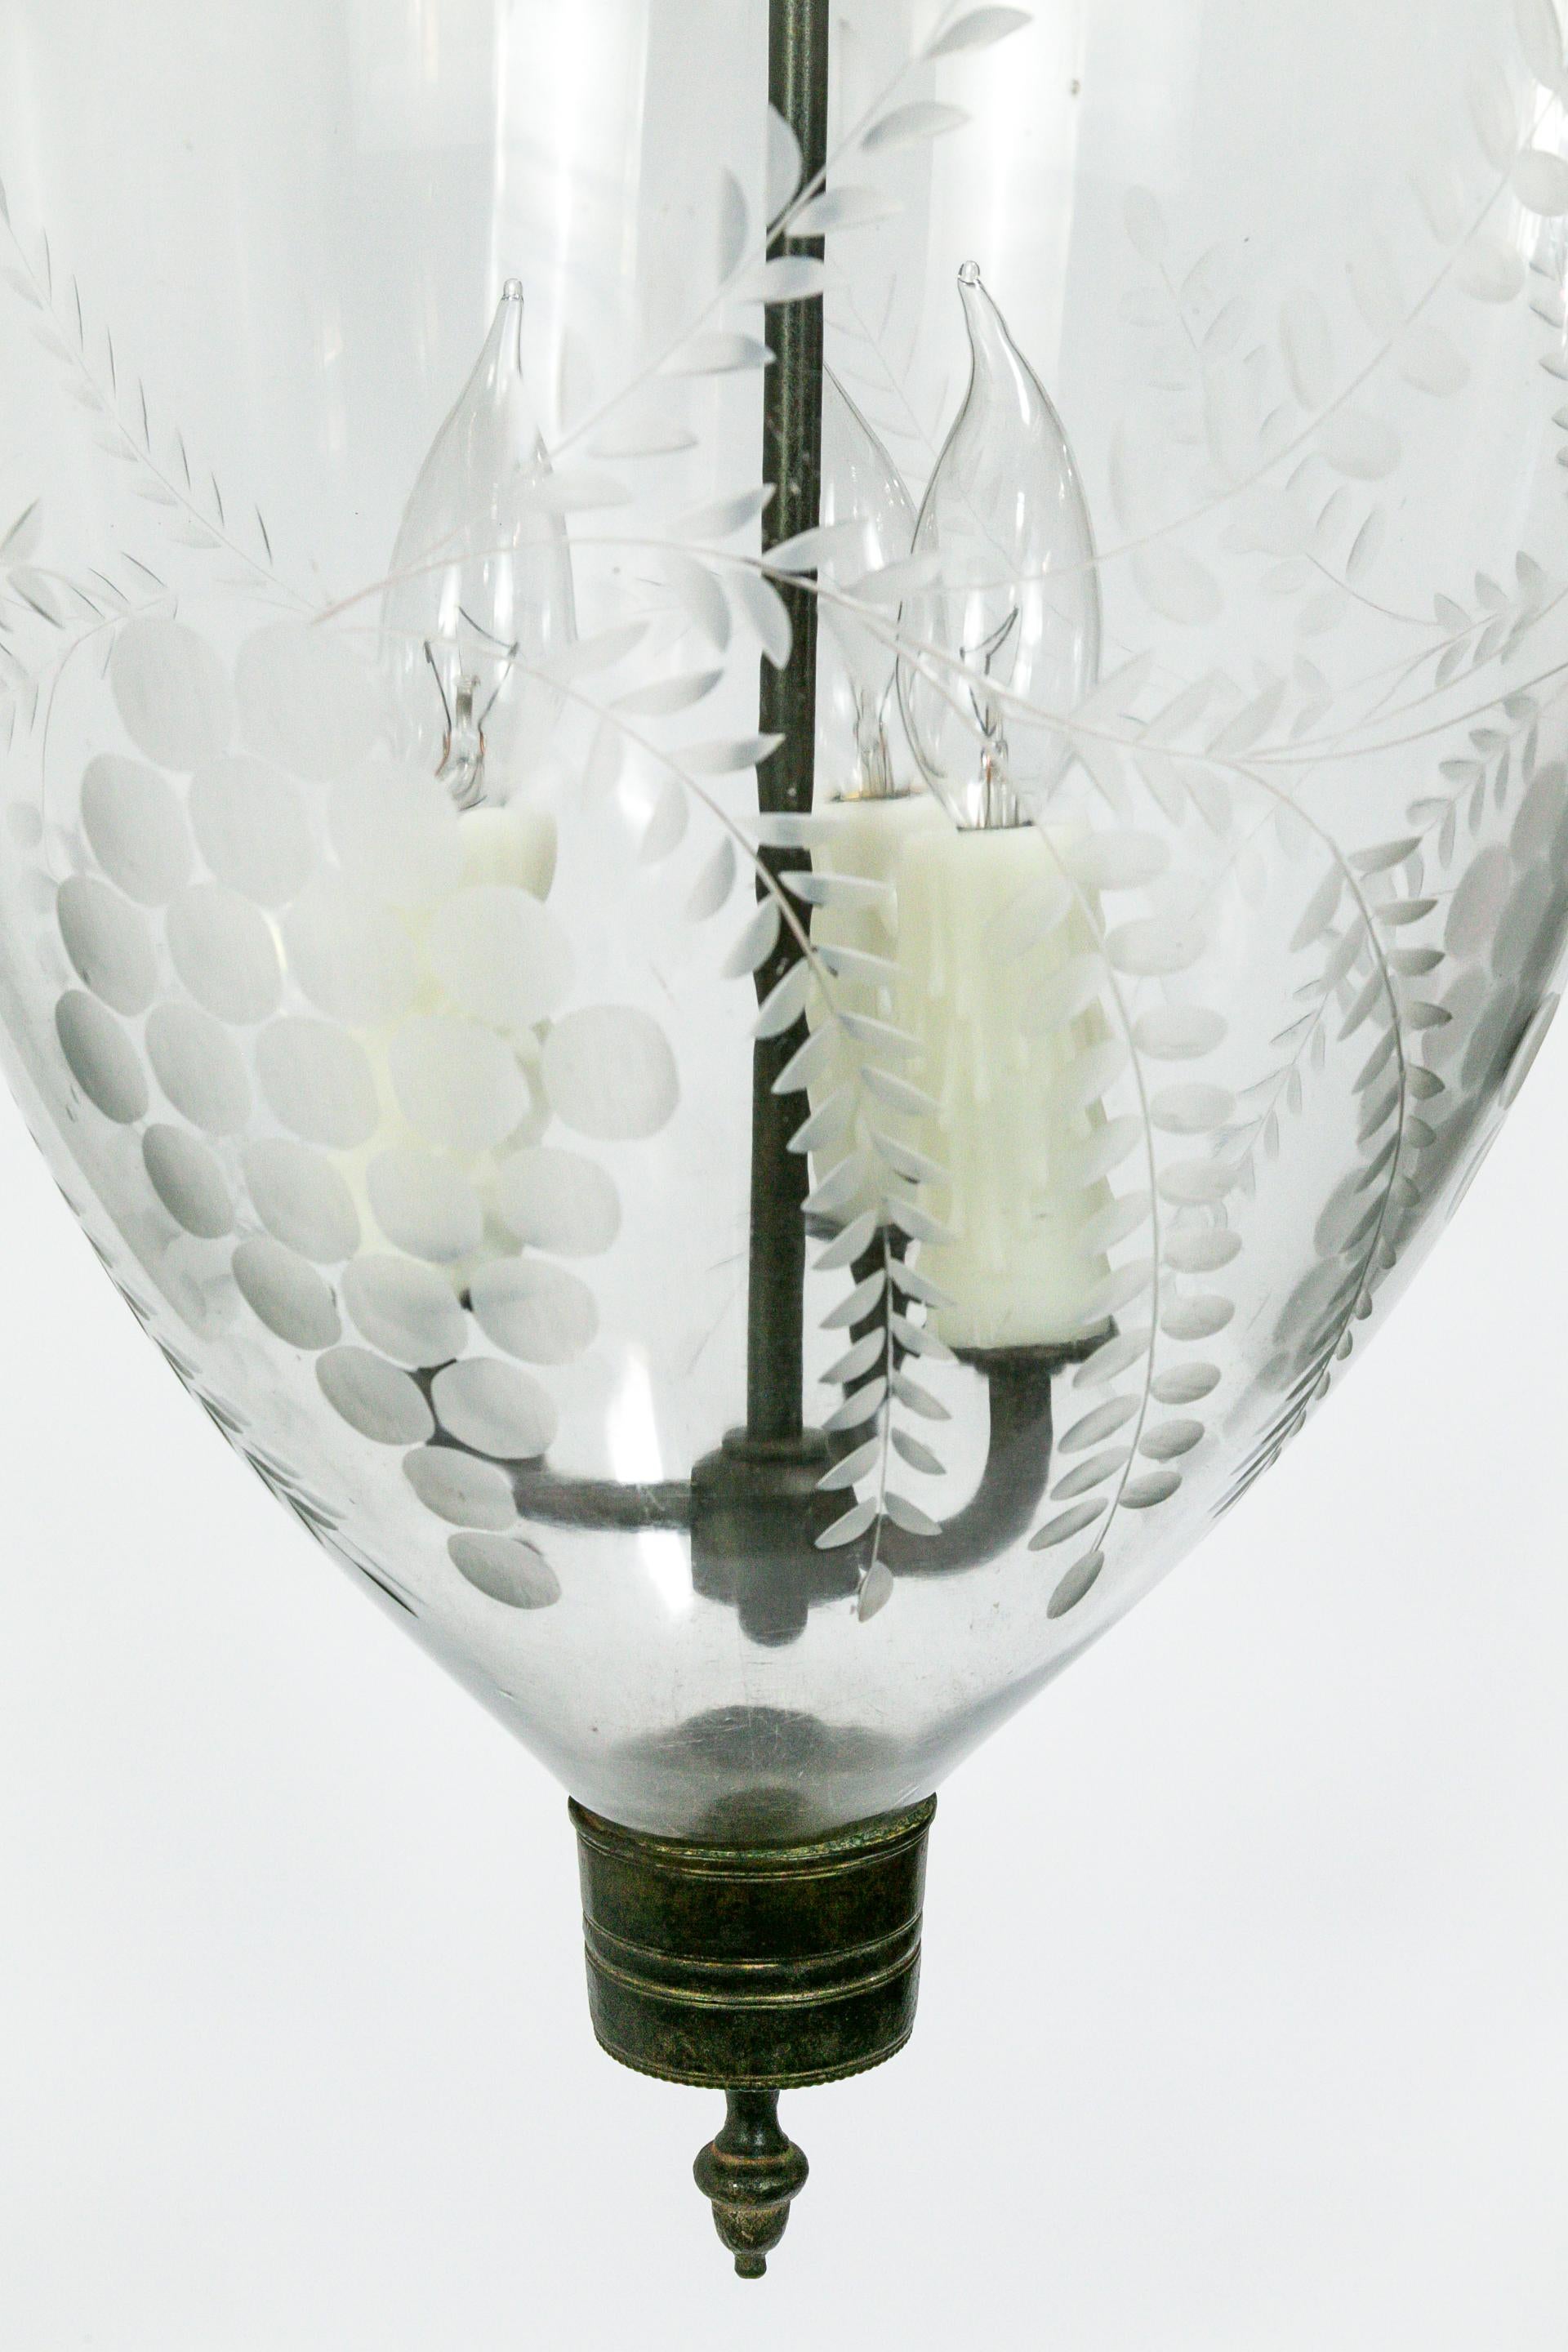 This Georgian style, bell jar pendant lantern is hand blown and etched with a lovely, grape and leaf pattern. The etched smoke bell is particularly notable, with an intricate, flower design. The brass glass holder features bird chain hooks. The